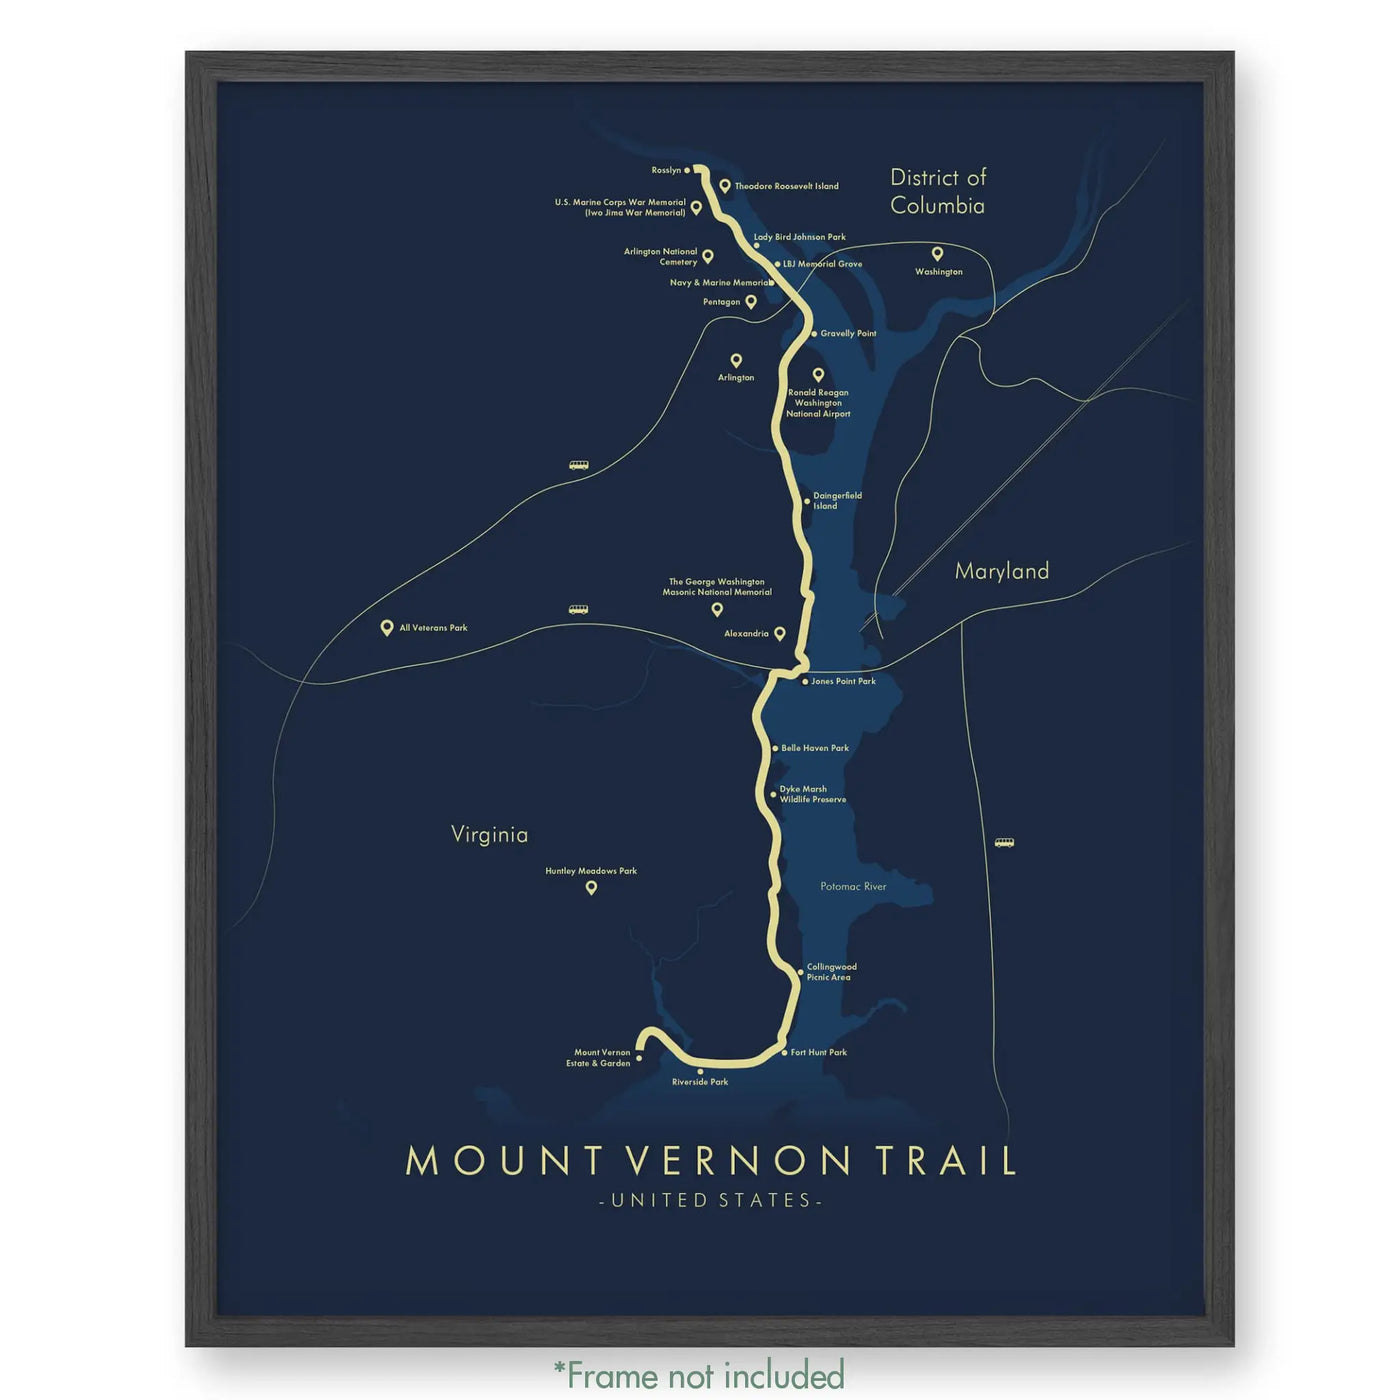 Trail Poster of Mount Vernon Trail - Blue